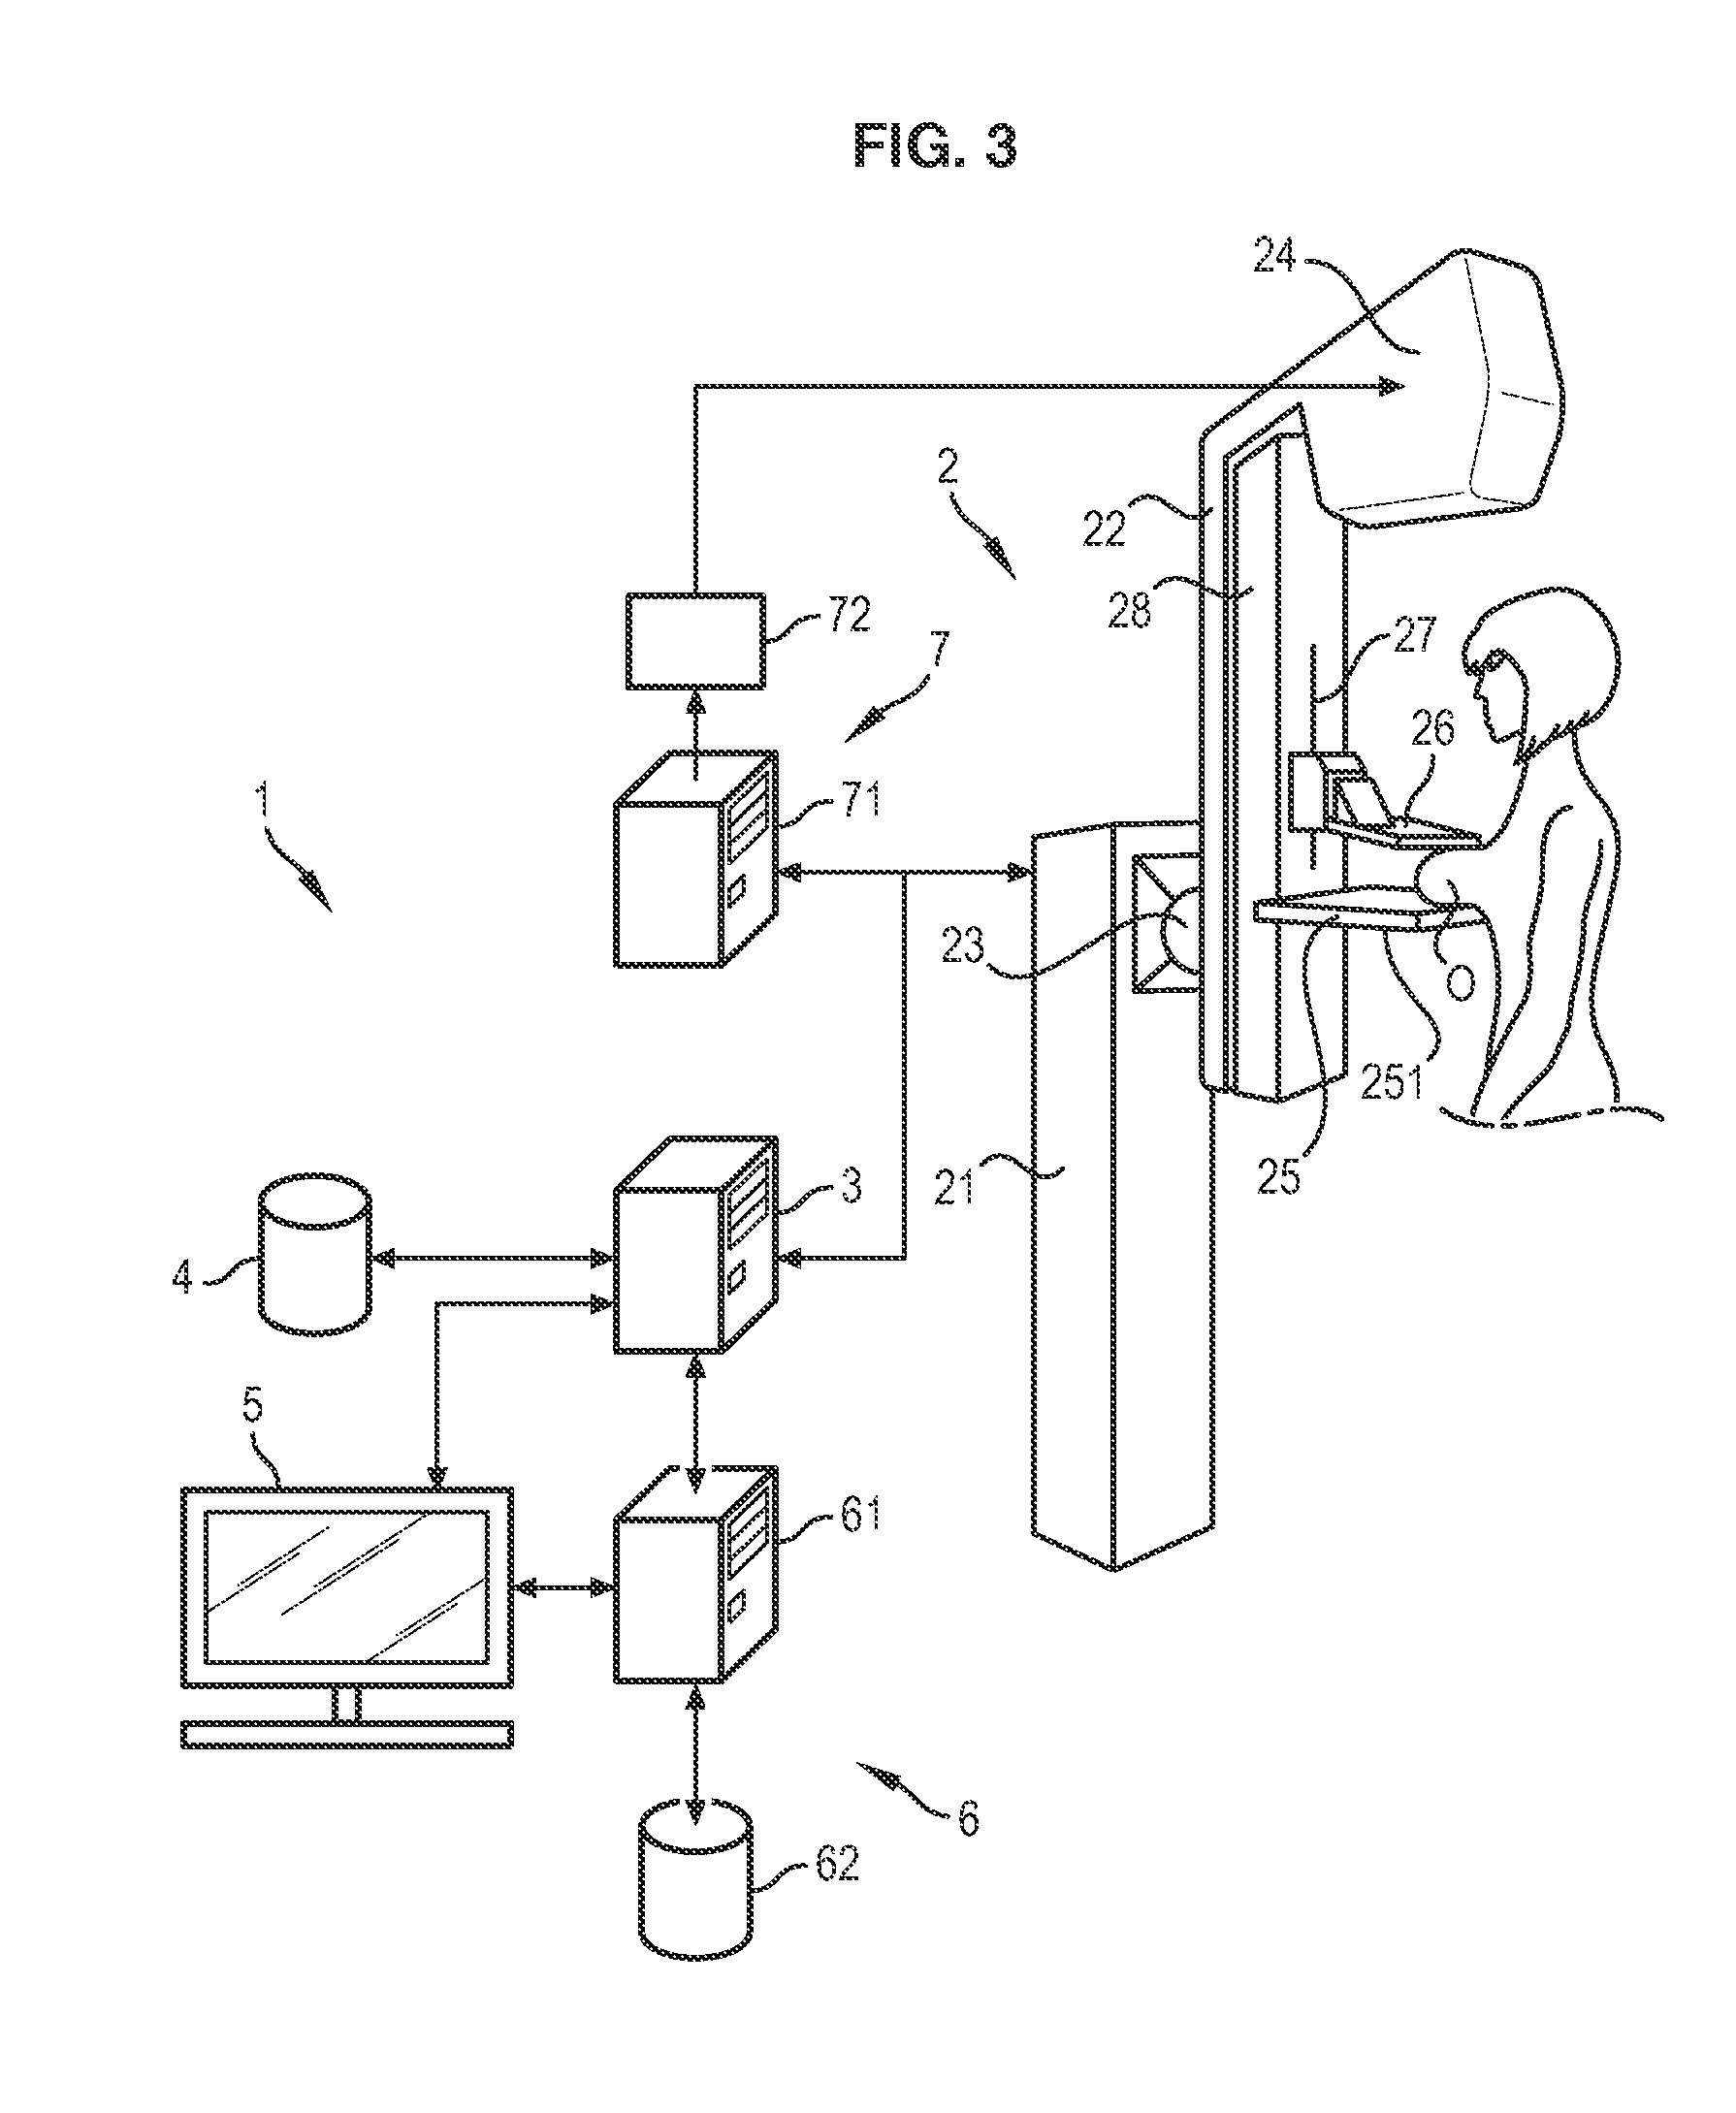 Method for assisted positioning of an organ on a platform of a medical imaging system